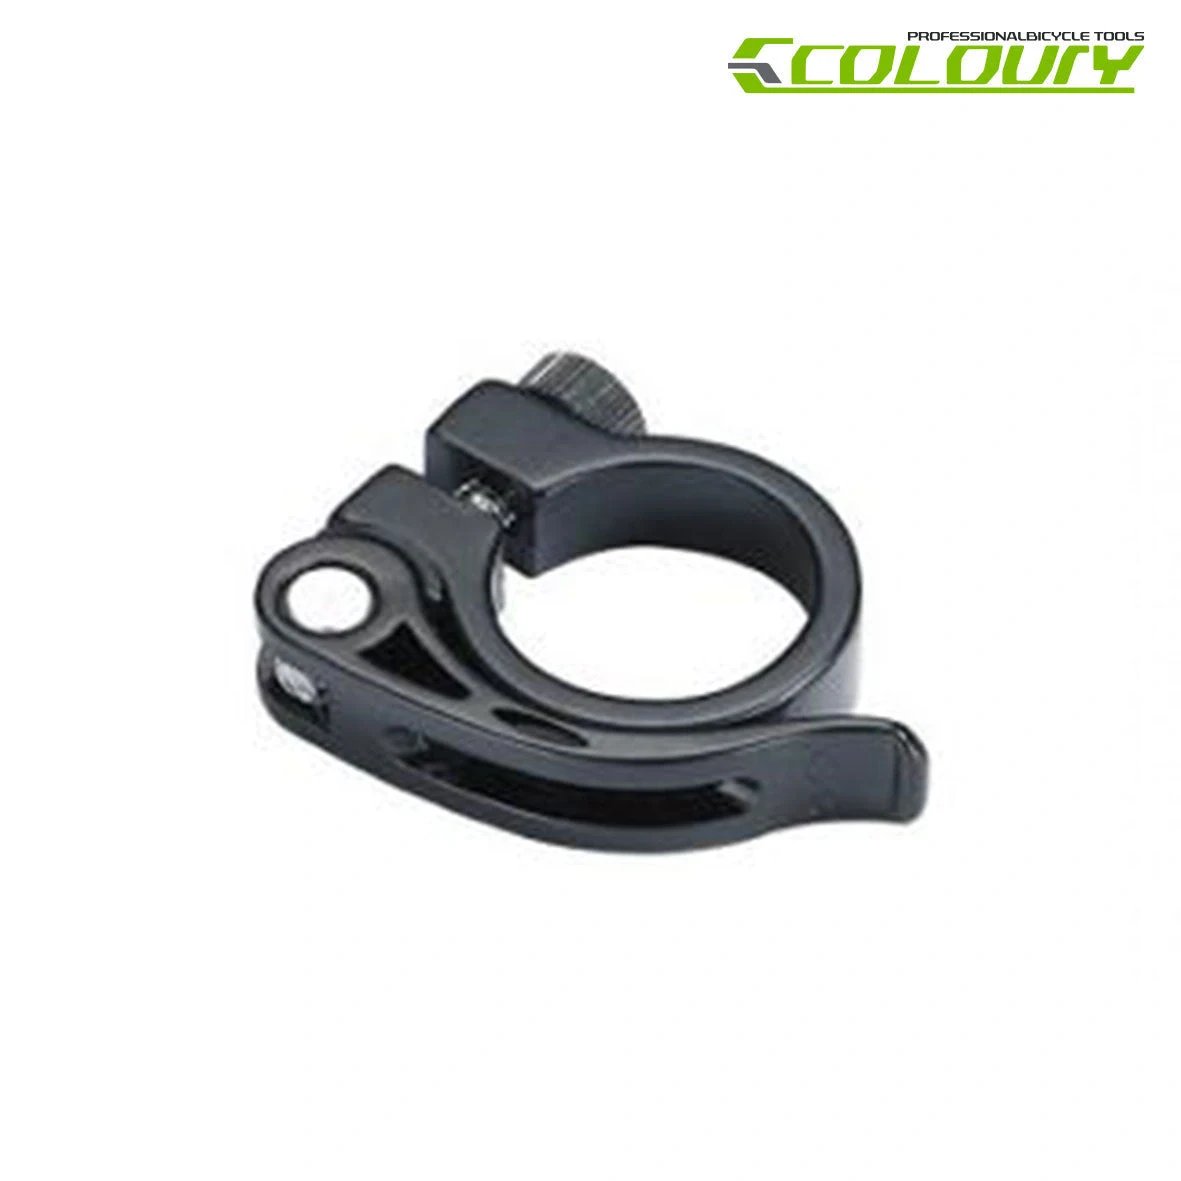 Coloury 34.9 Seatpost Clamp - Secure Seat Post Parts